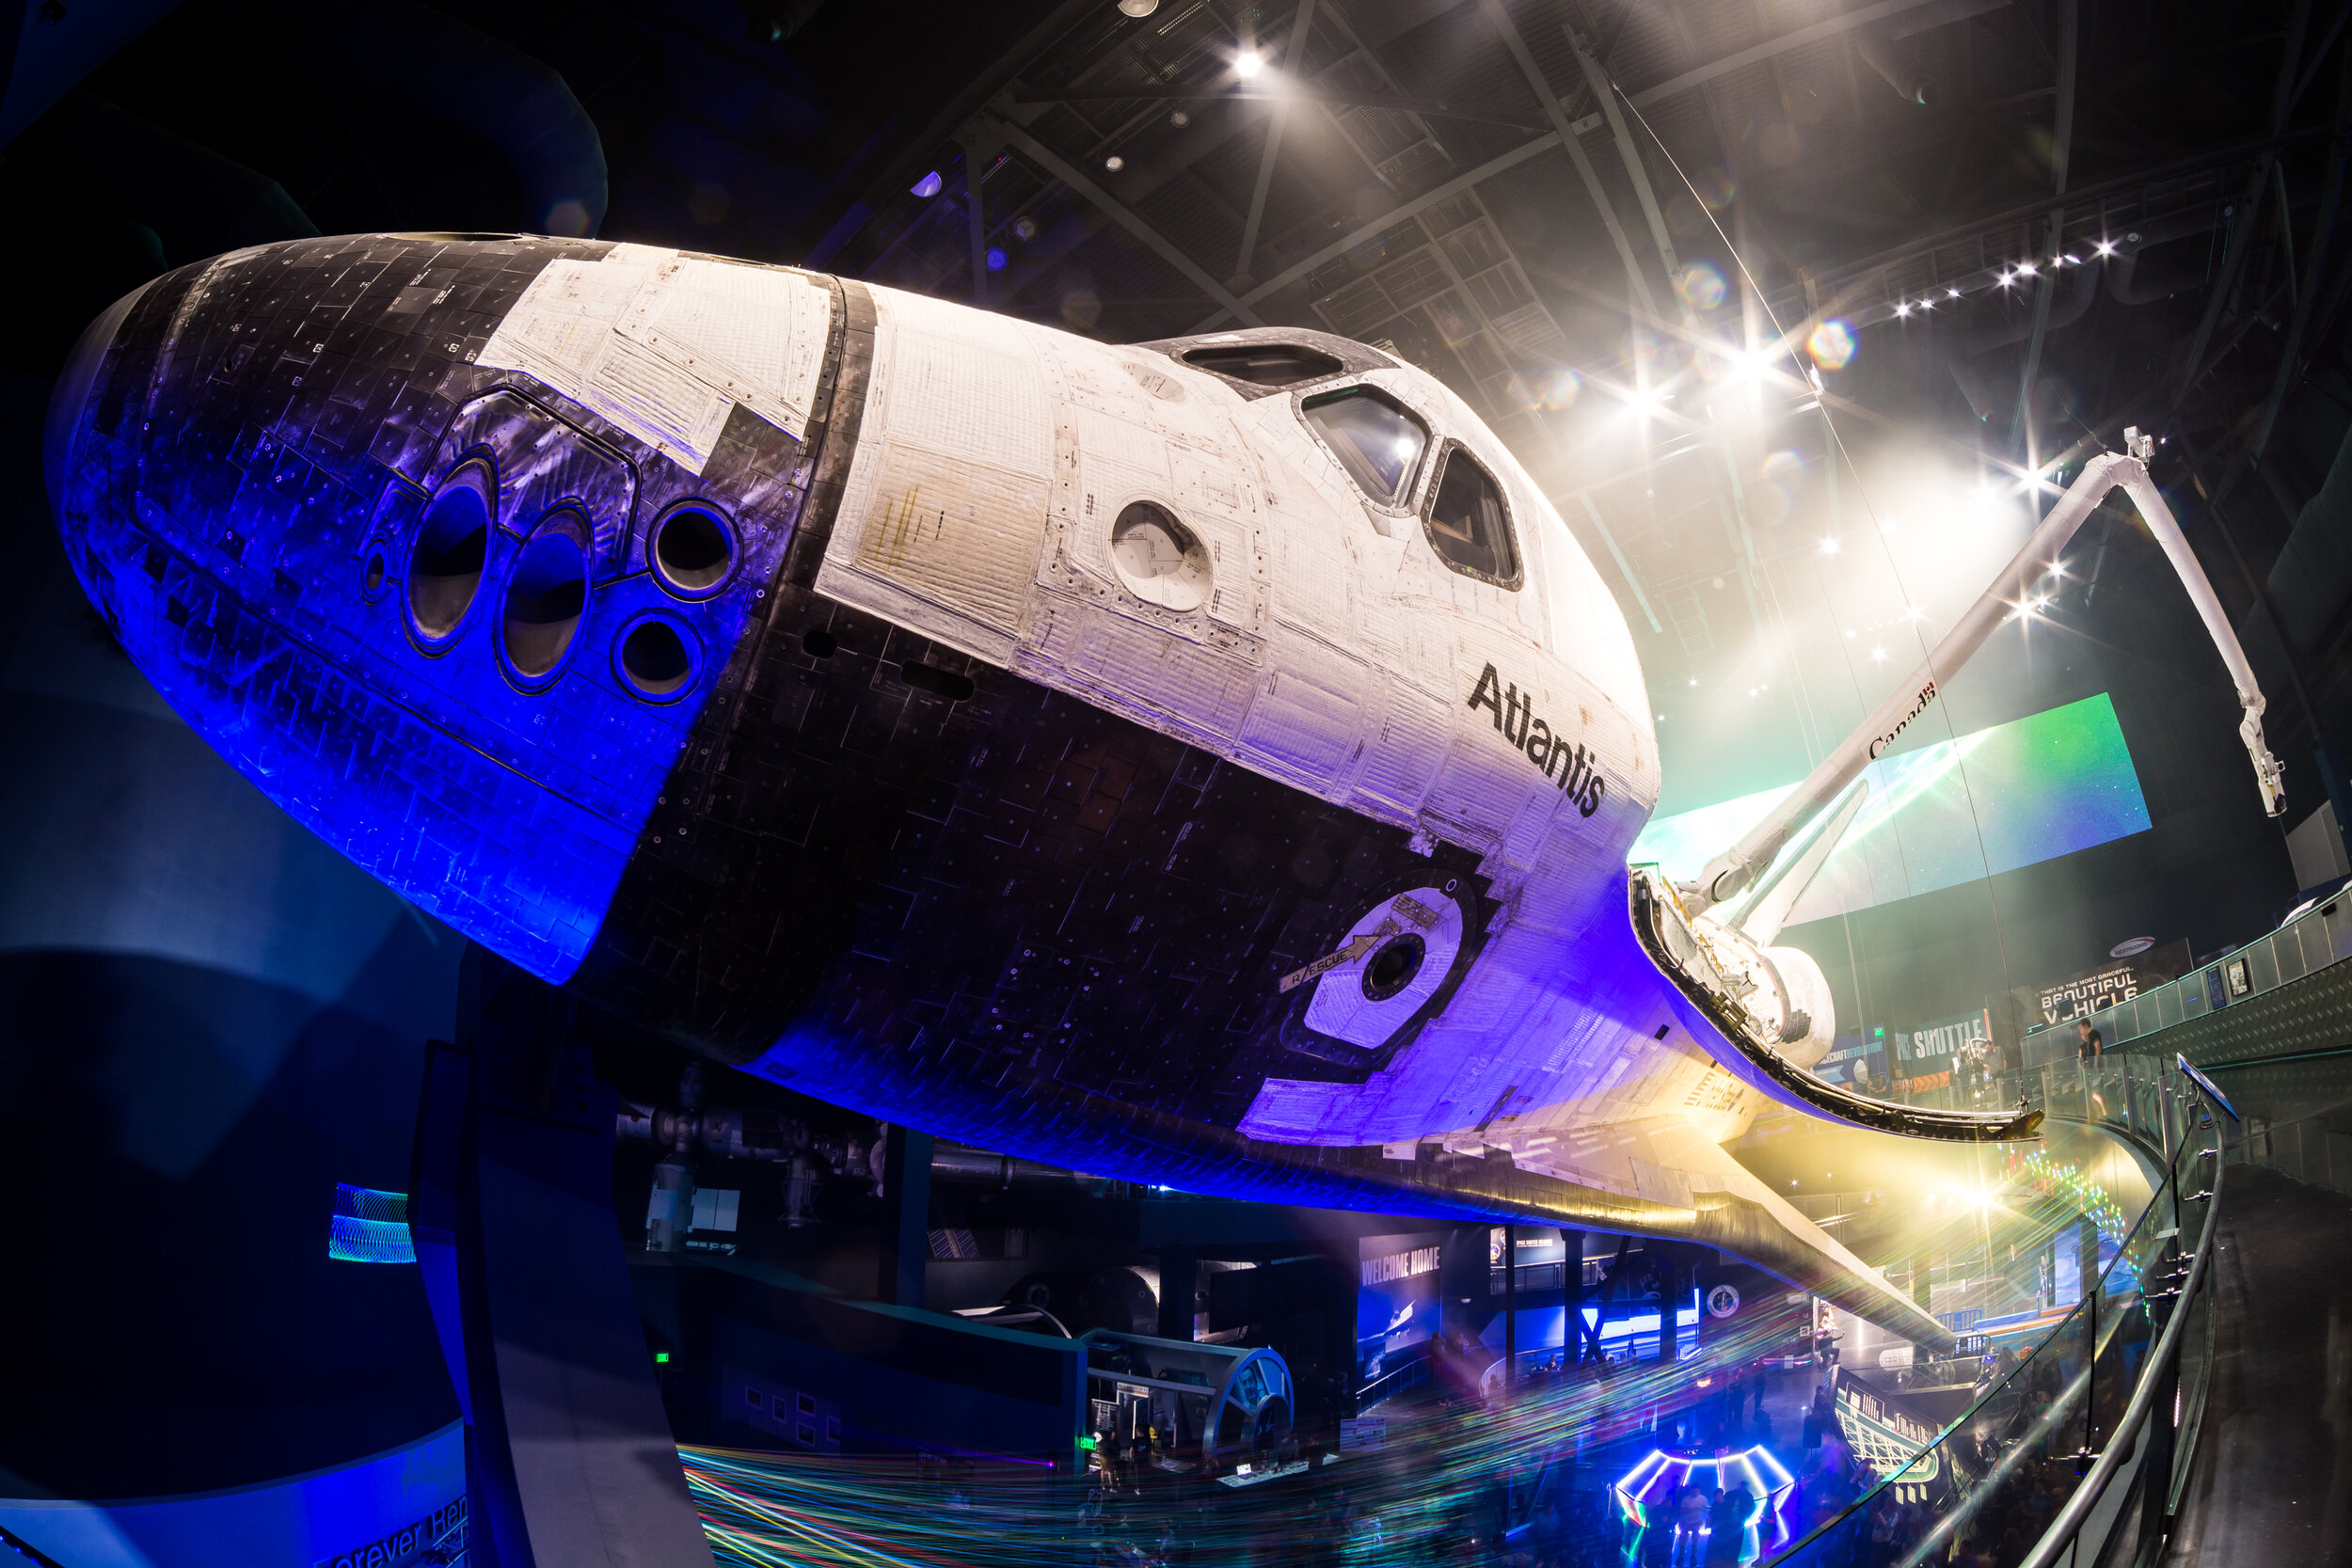 Space Shuttle Atlantis at Kennedy Space Center during Yuri's Night